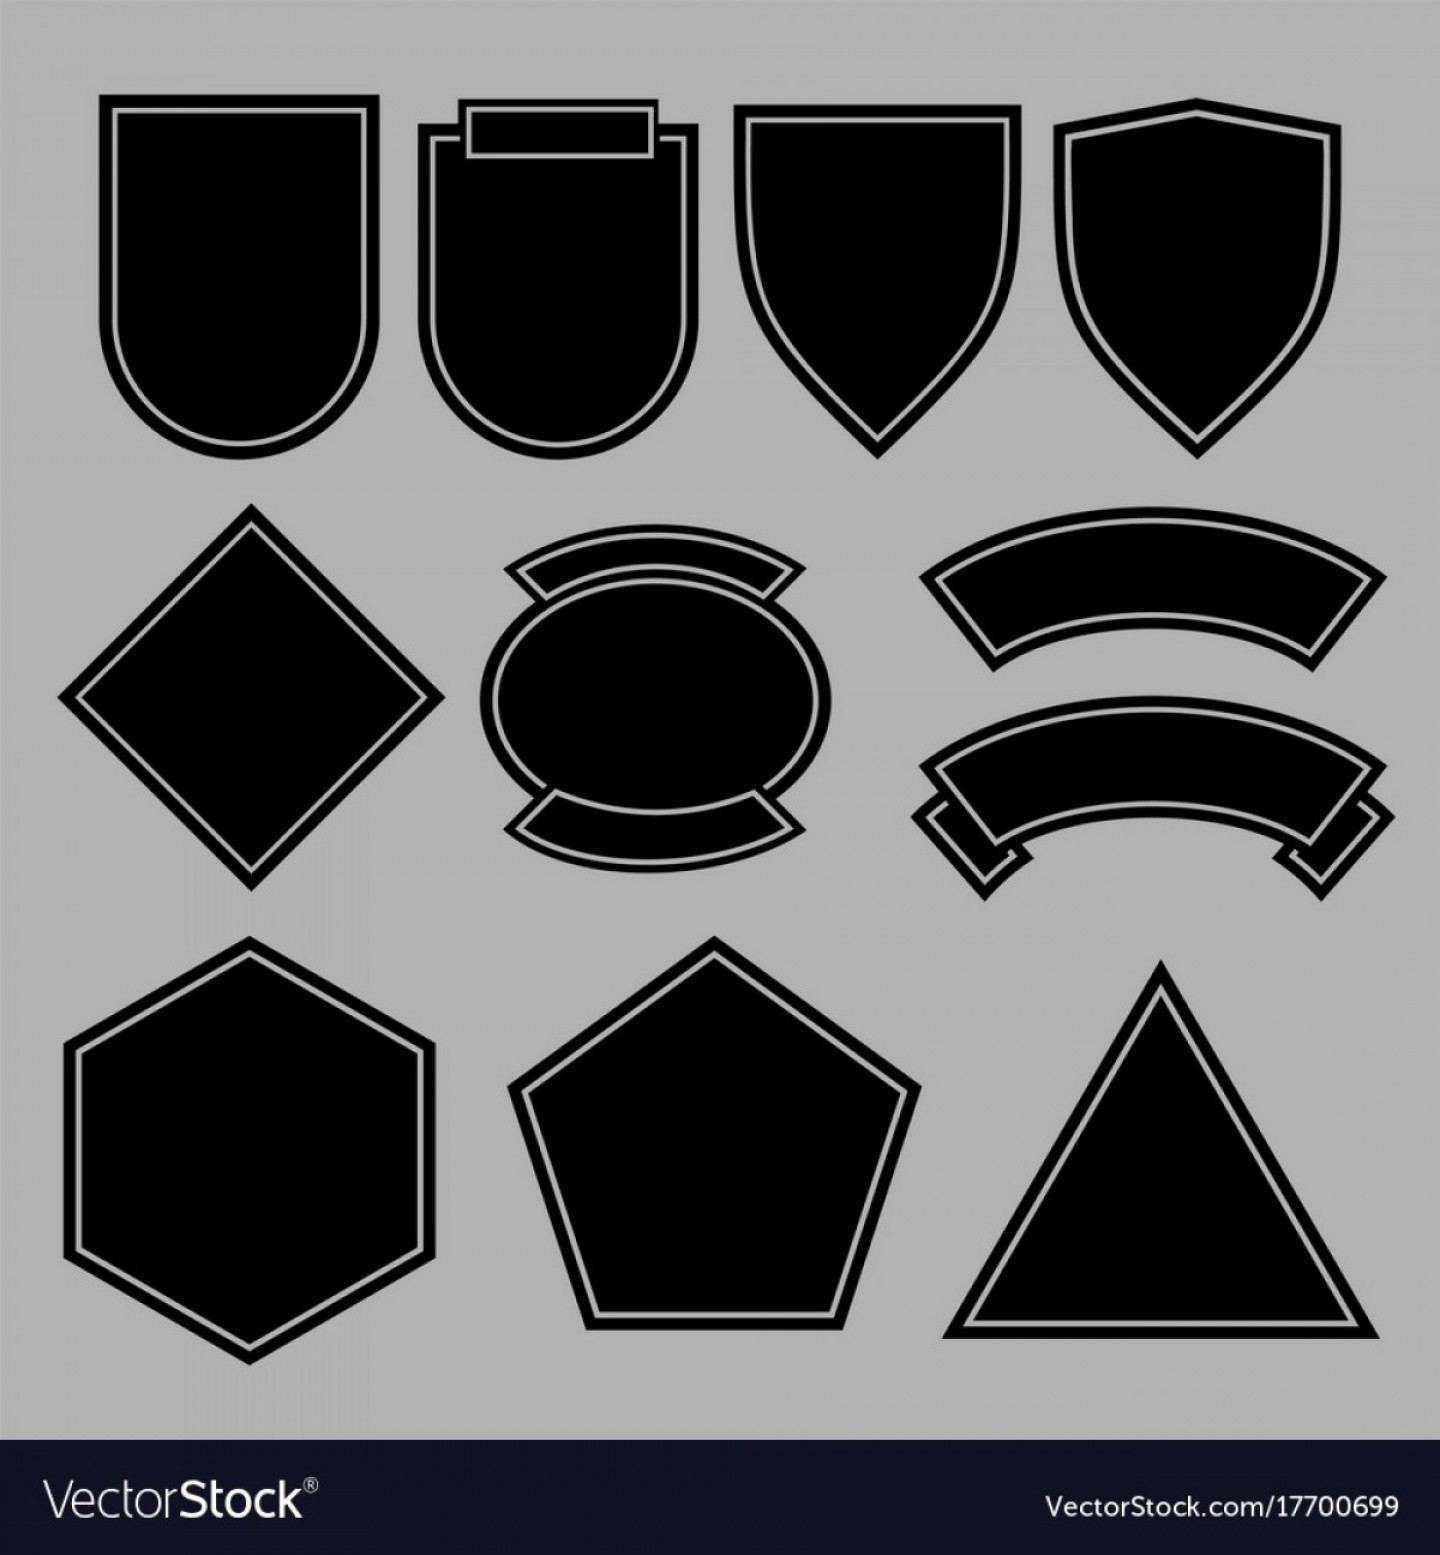 Blank Military Patch Template